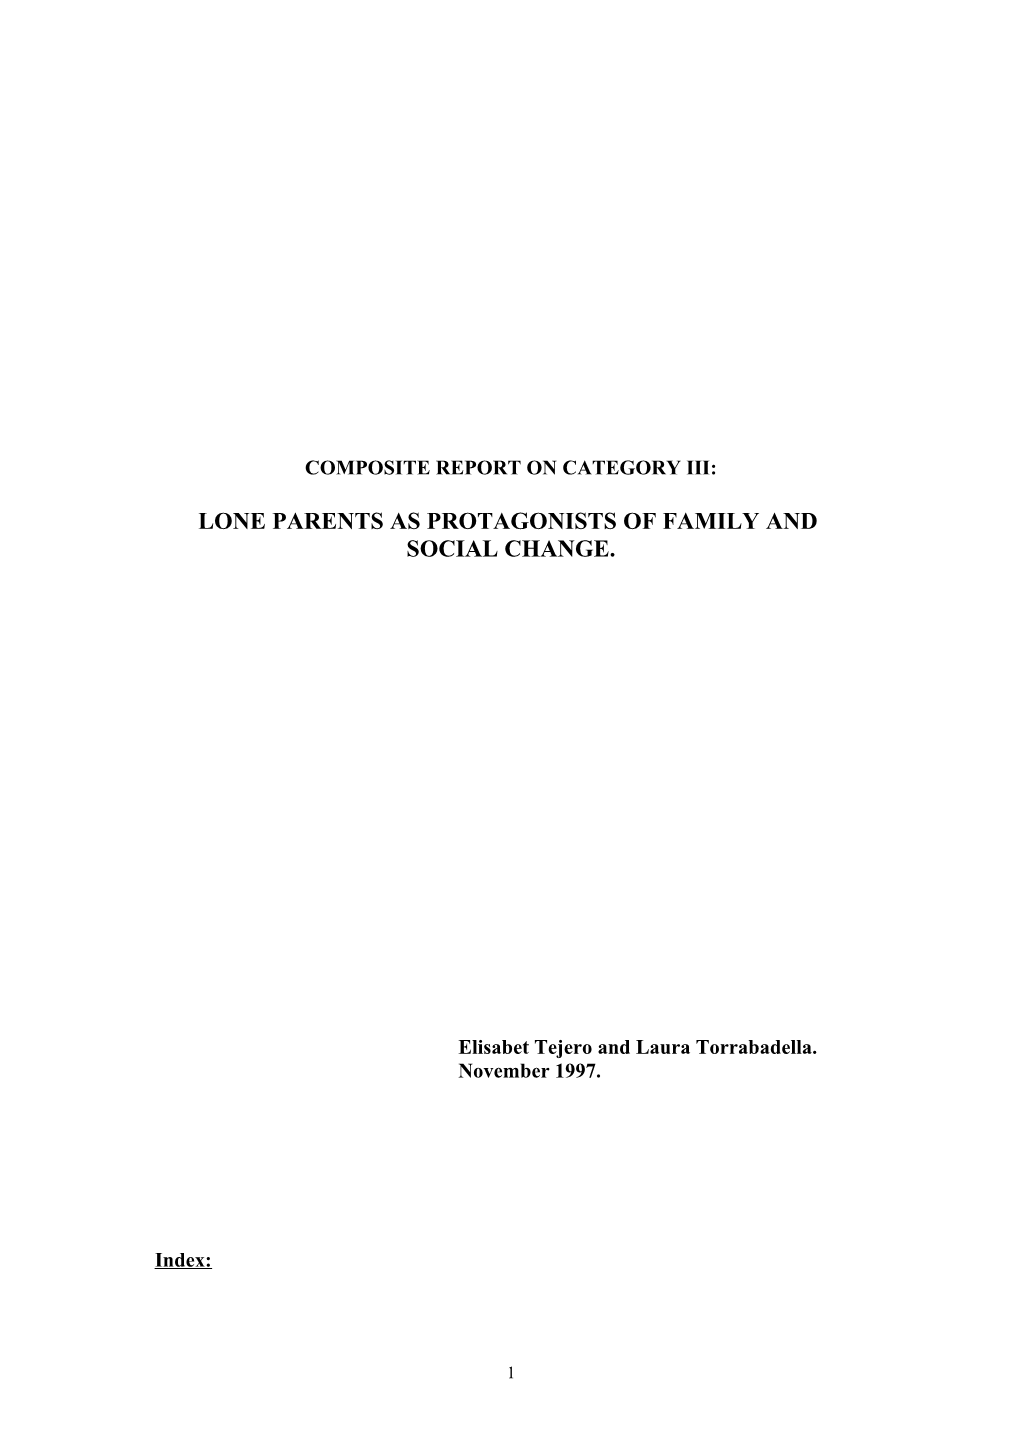 Composite Report on Lone Parents